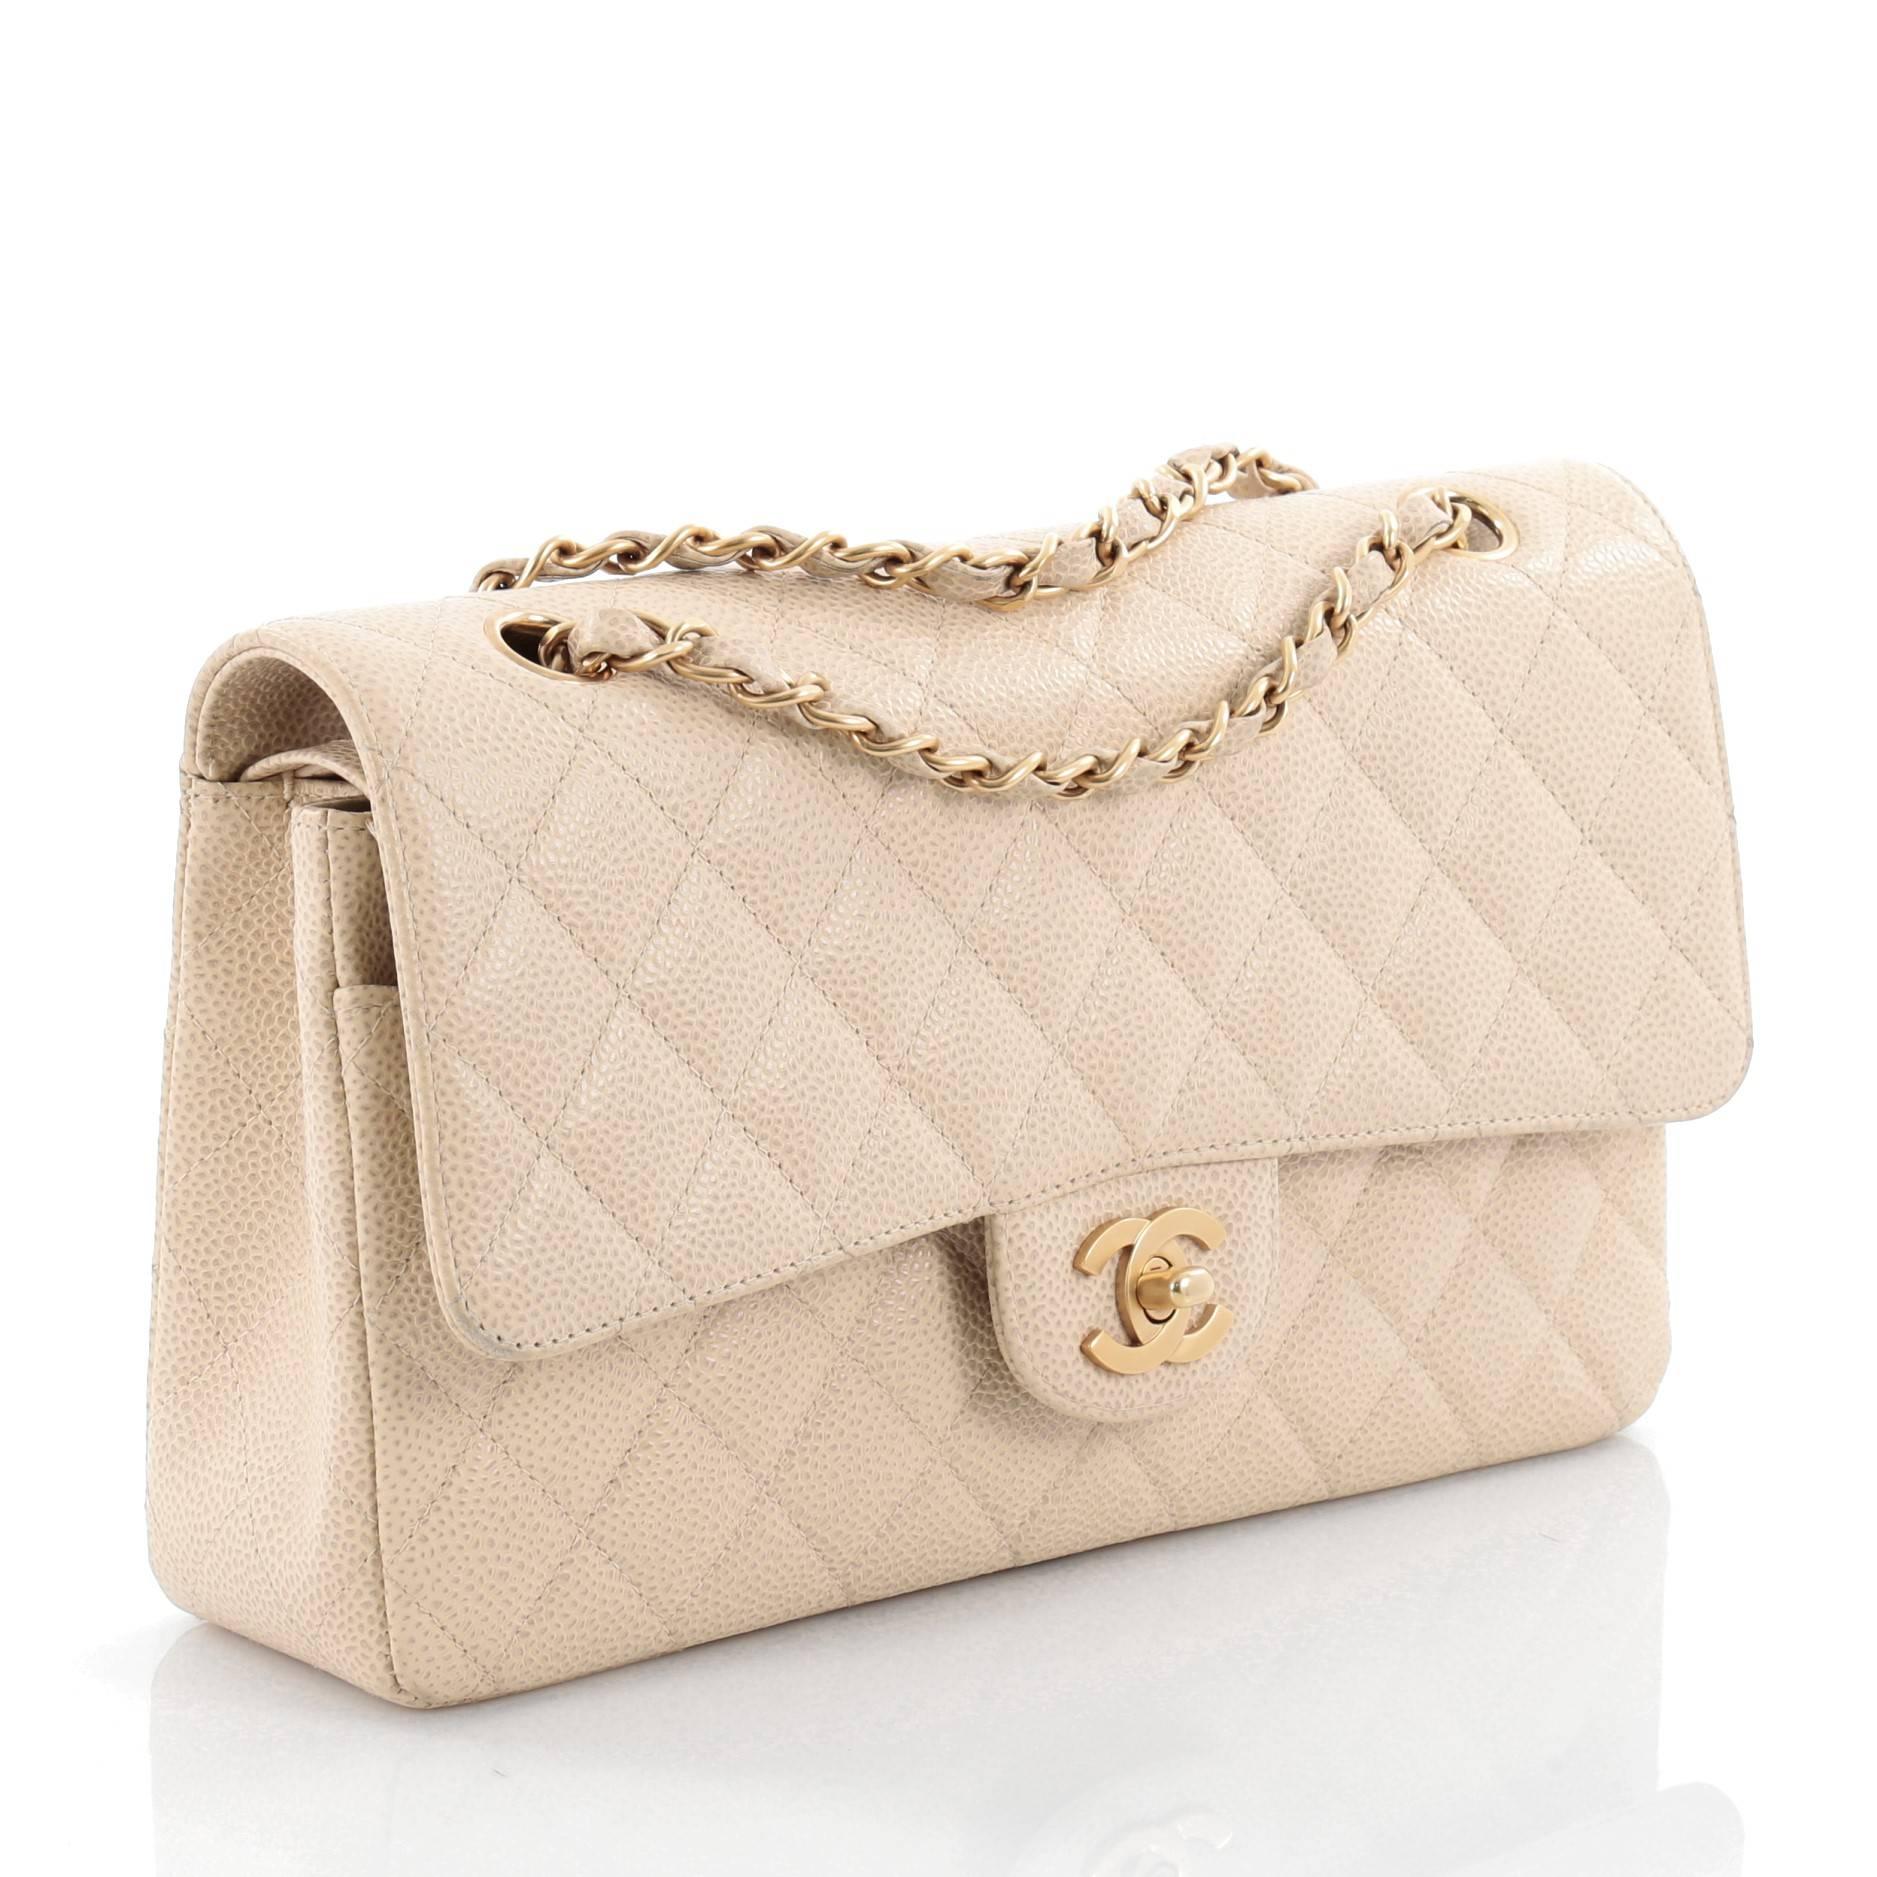 Beige Chanel Vintage Classic Double Flap Bag Quilted Caviar Medium